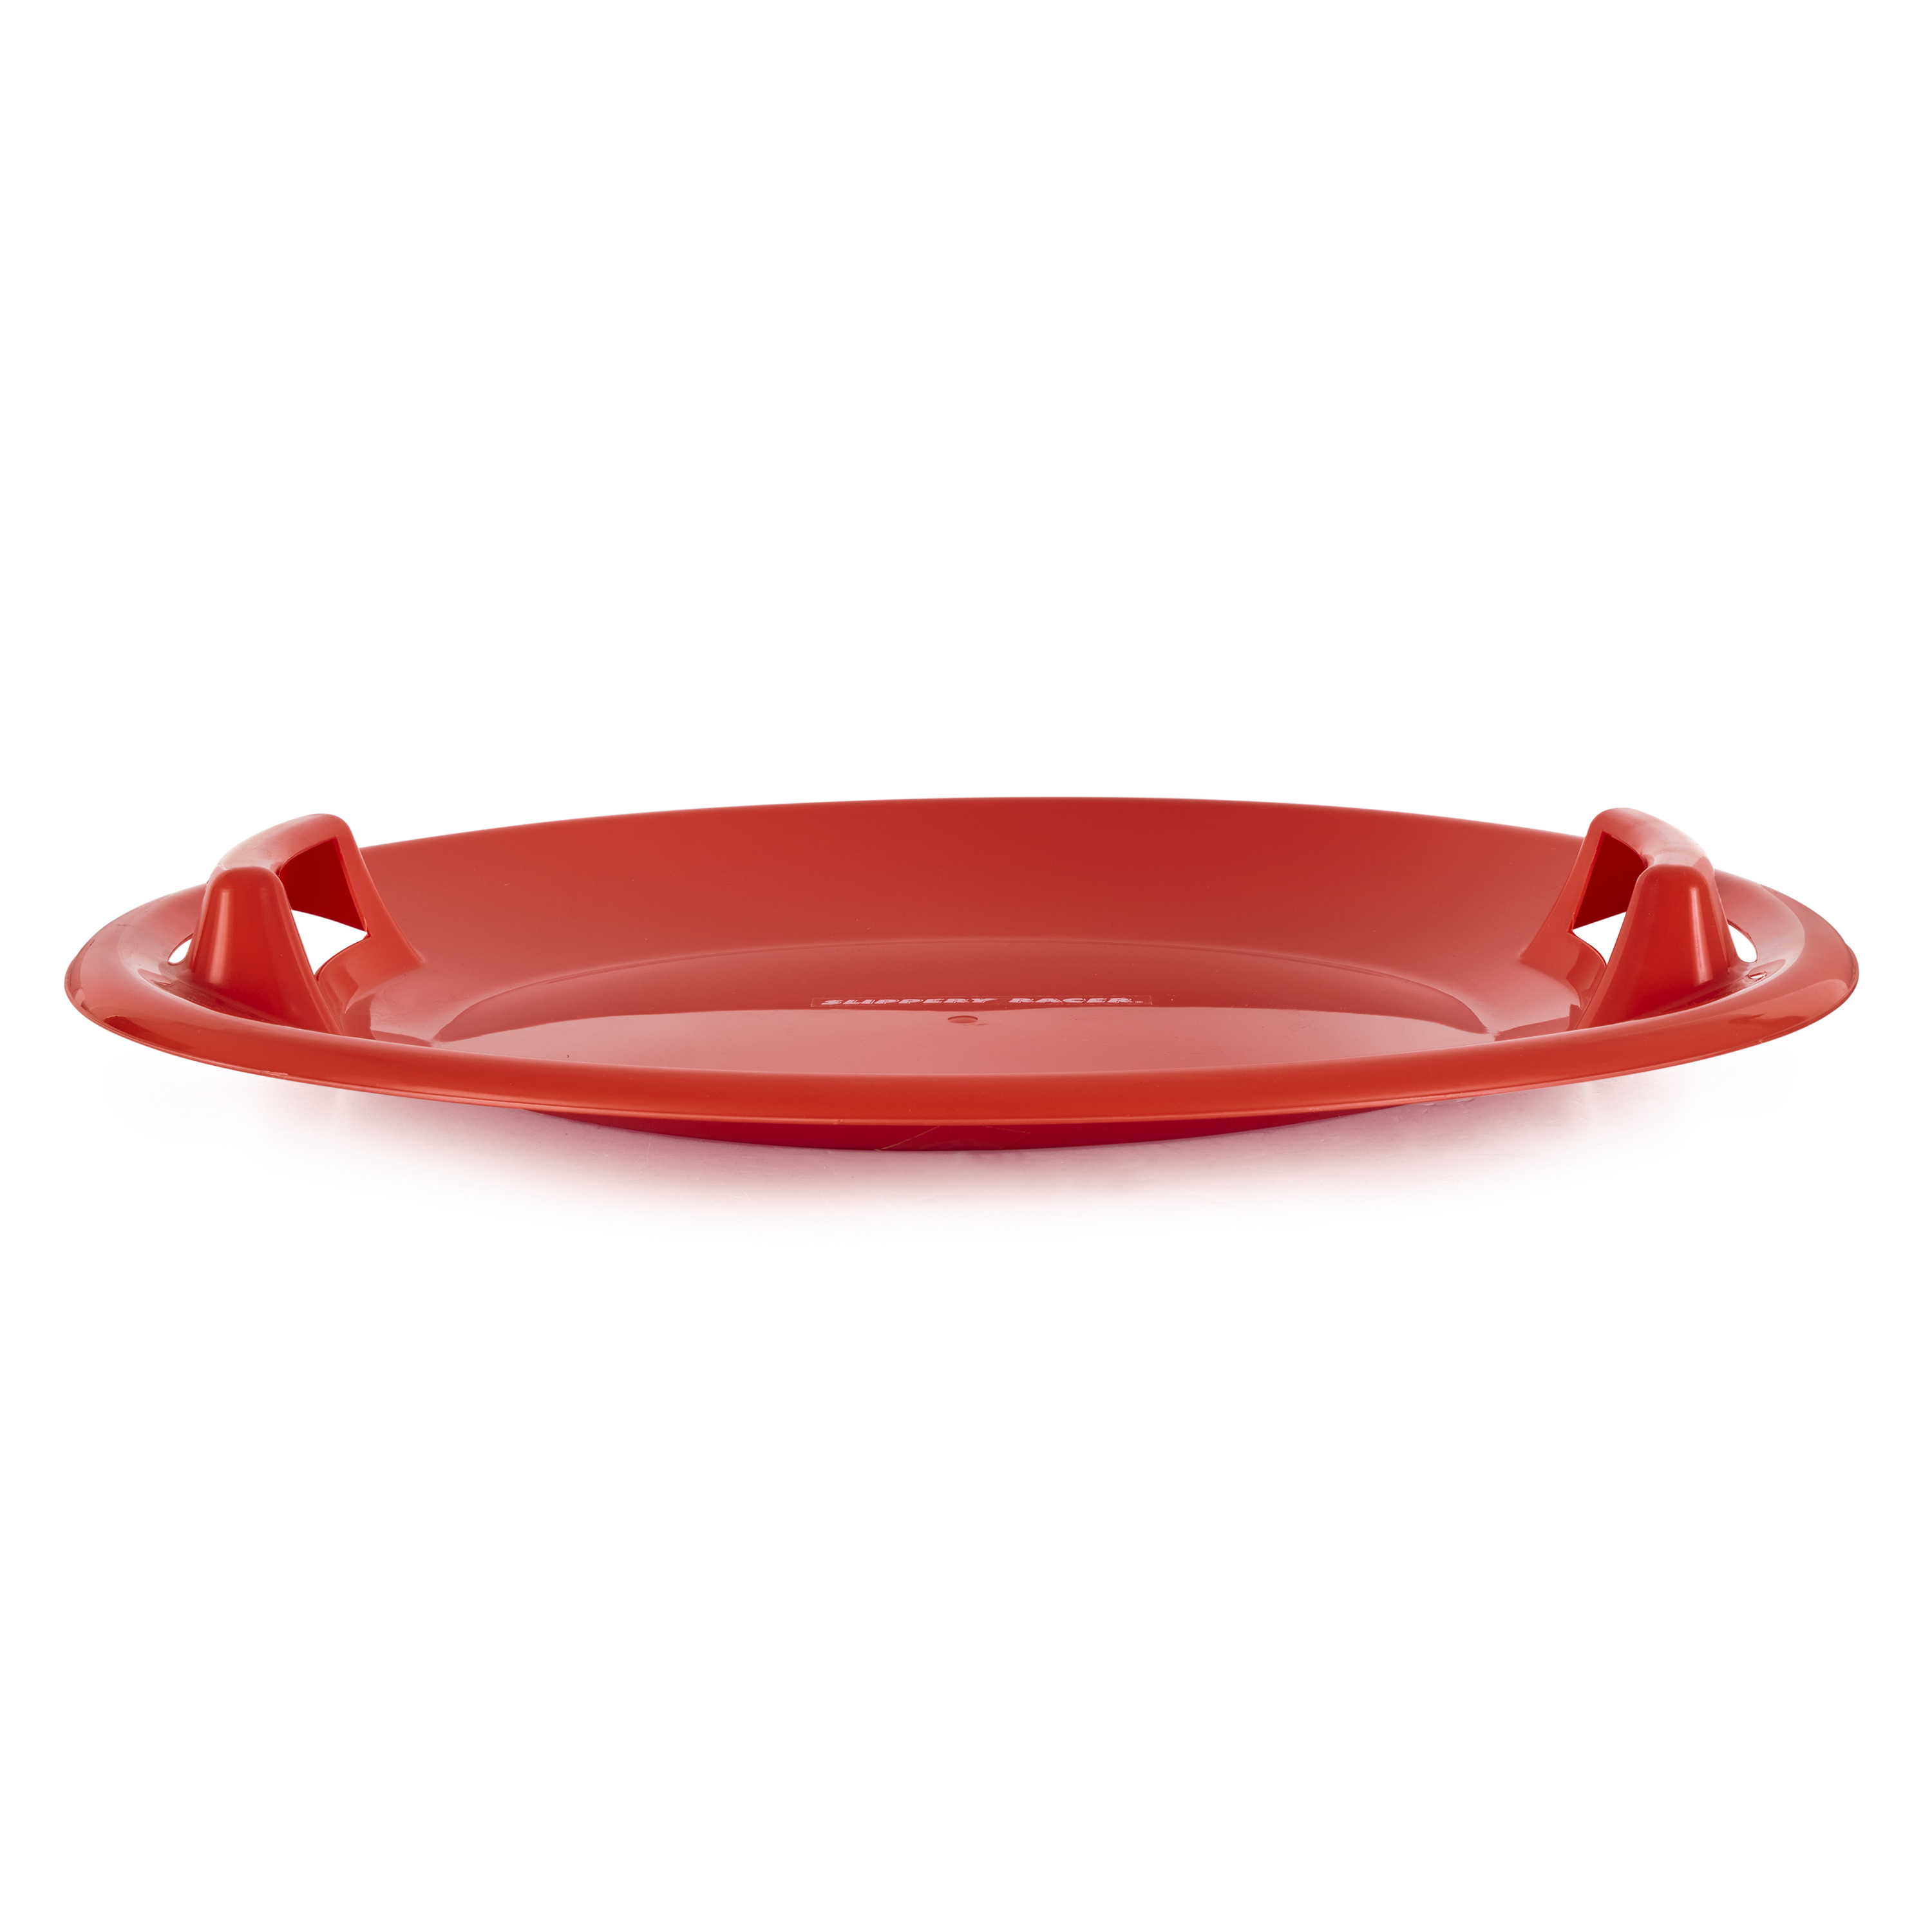 Slippery Racer Downhill Pro Adults and Kids Plastic Saucer Disc Snow Sled, Red - image 3 of 7